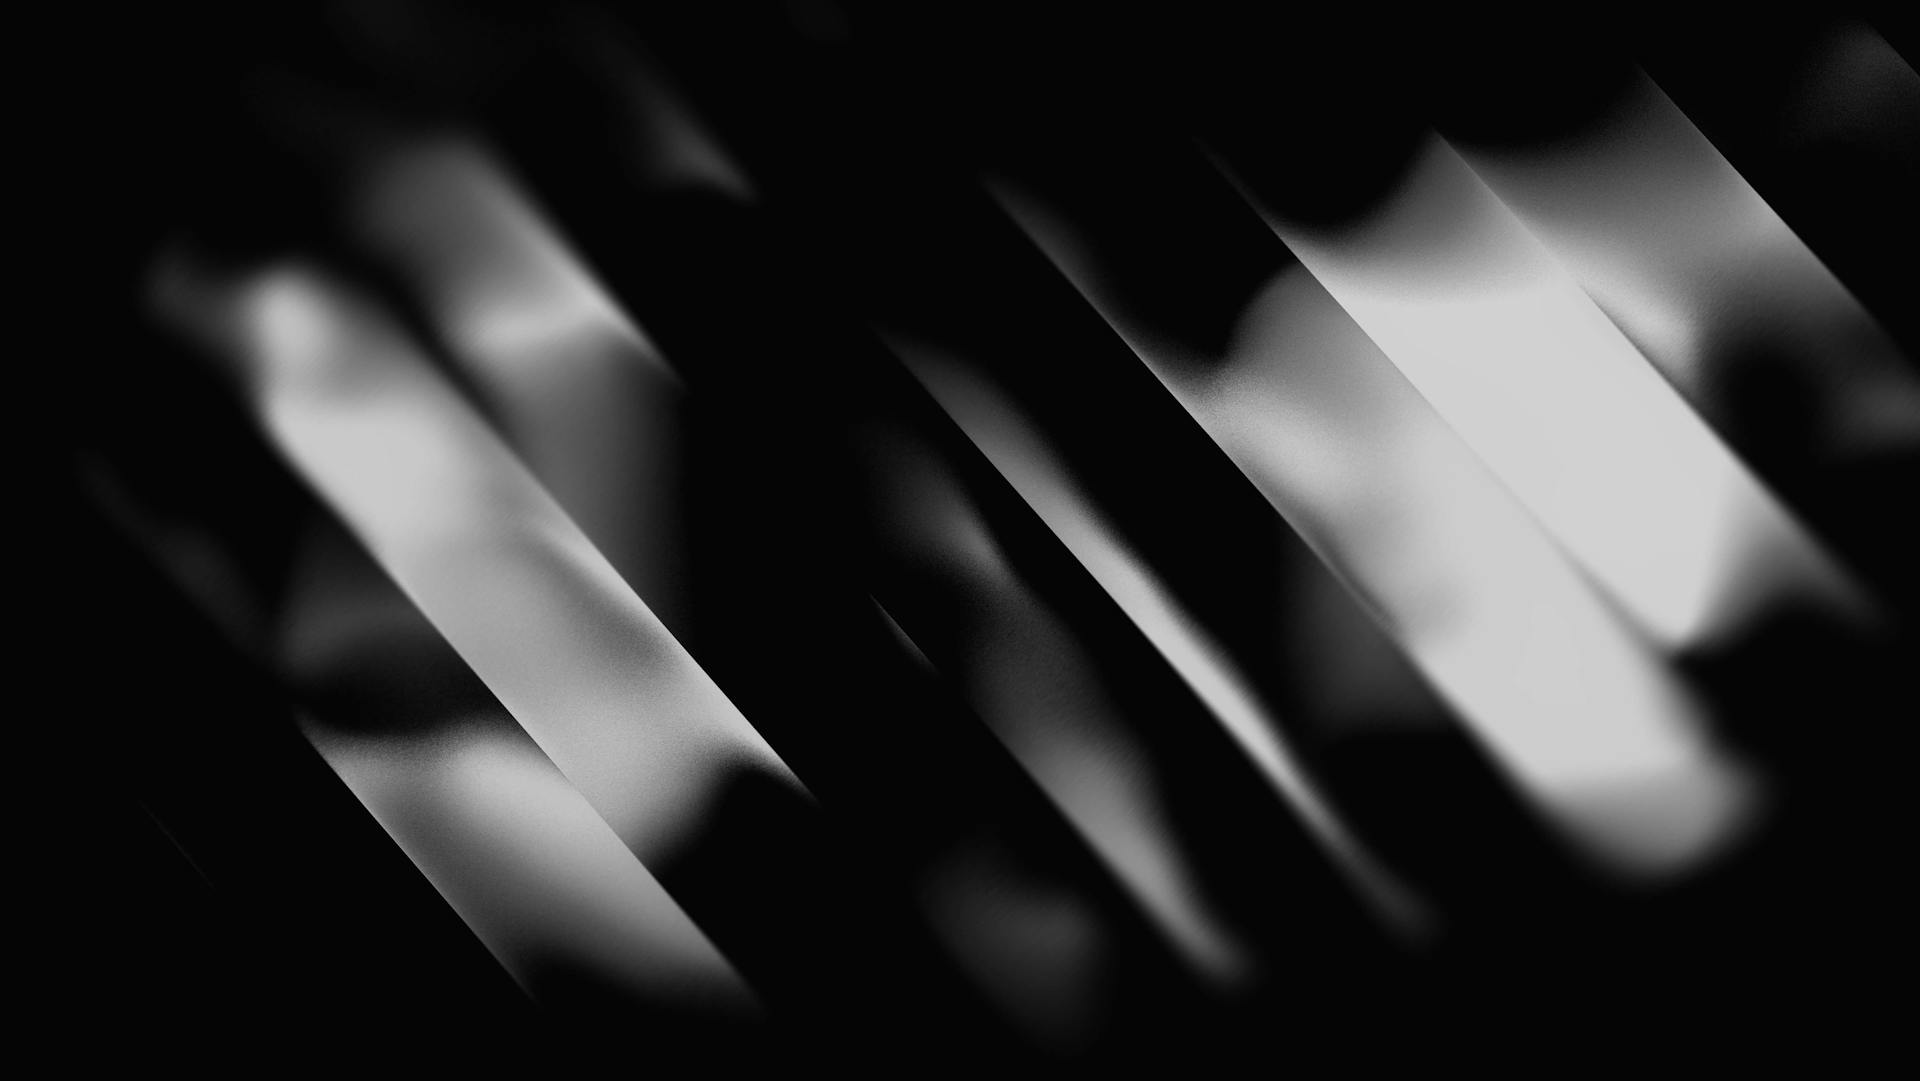 A series of diagonal black and white stripes with a smooth gradient effect. The alternating light and dark bands create a sense of depth and movement, resembling light rays or shadows cast across a surface. The overall aesthetic is abstract and high-contrast, with a sleek, modern feel.